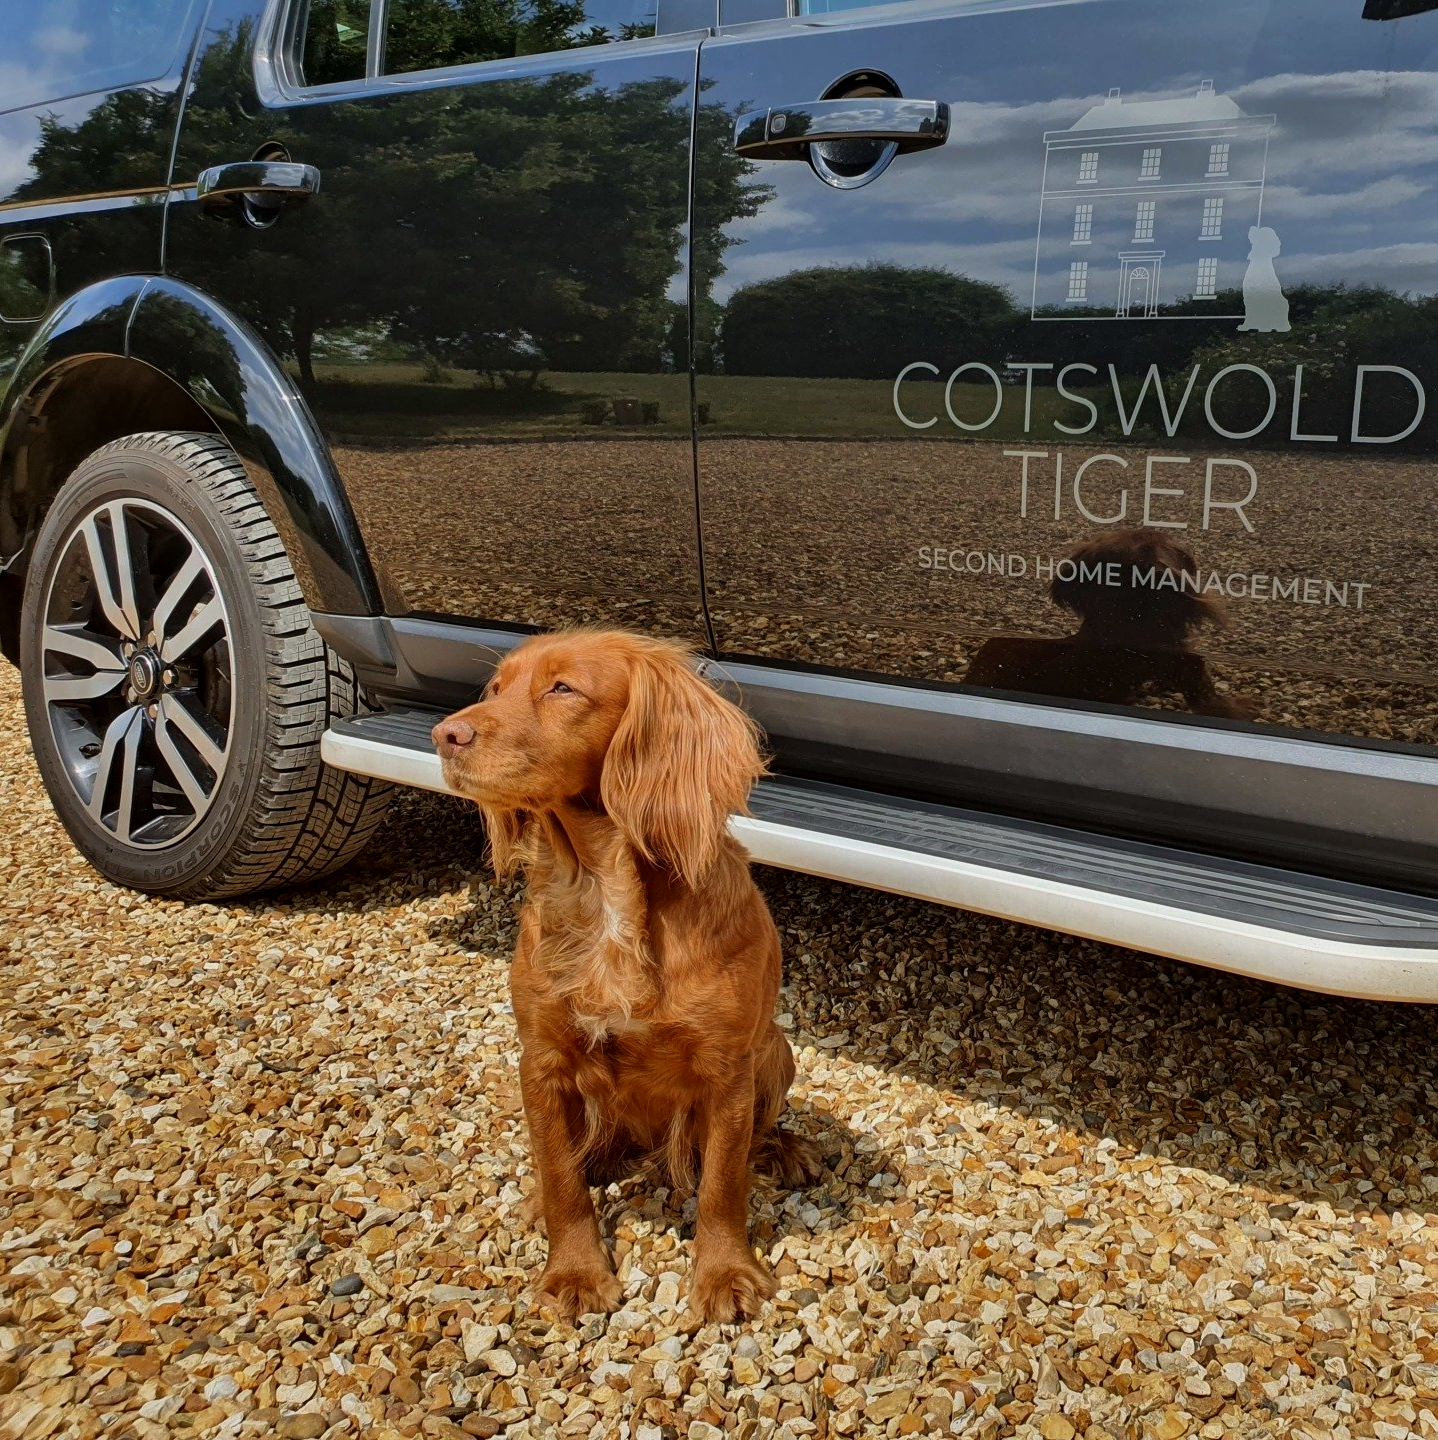 red spaniel sitting next to black discovery, Cotswold Tiger, The Second Home Company